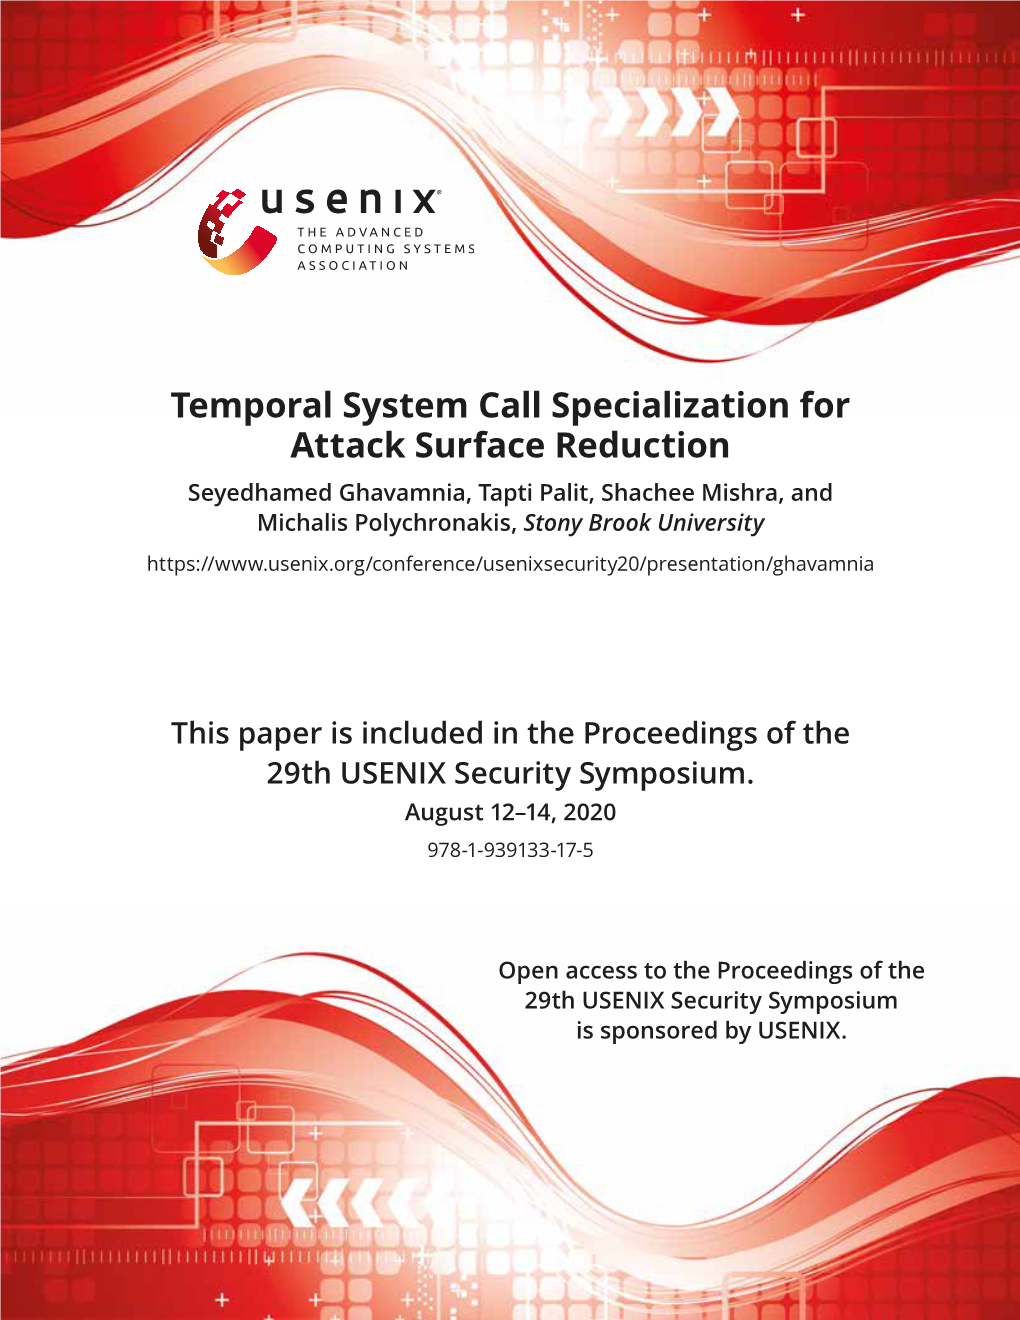 Temporal System Call Specialization for Attack Surface Reduction